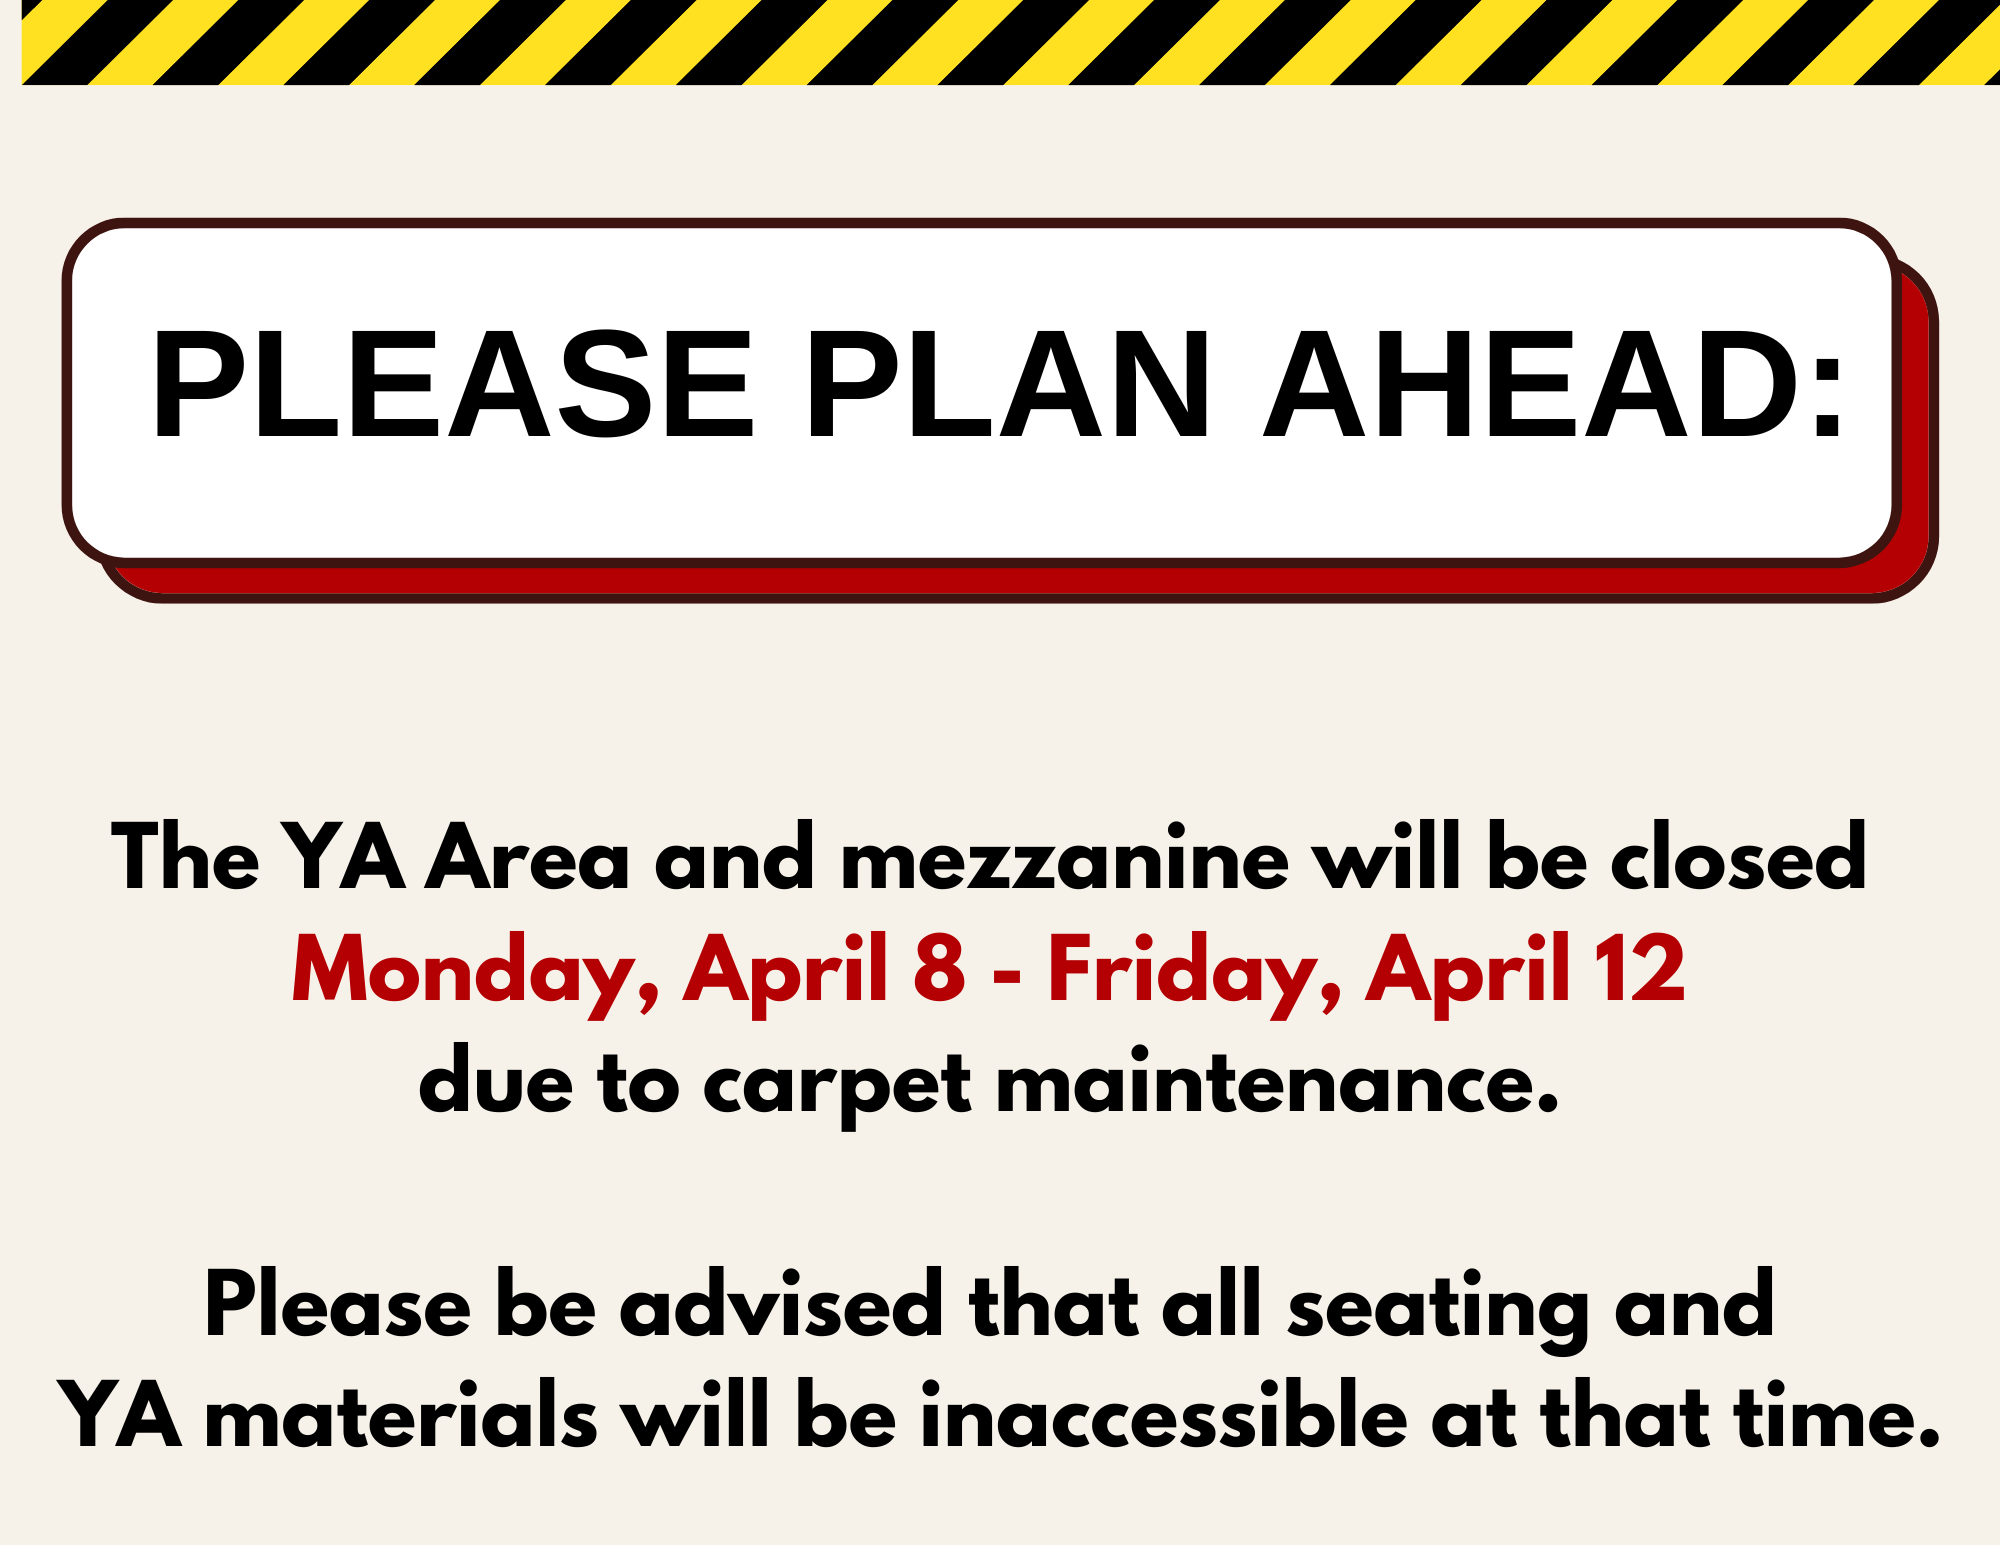 The YA Area and mezzanine will be closed Monday, April 8 - Friday, April 12 due to carpet maintenance. Please be advised that all seating and YA materials will be inaccessible at that time.